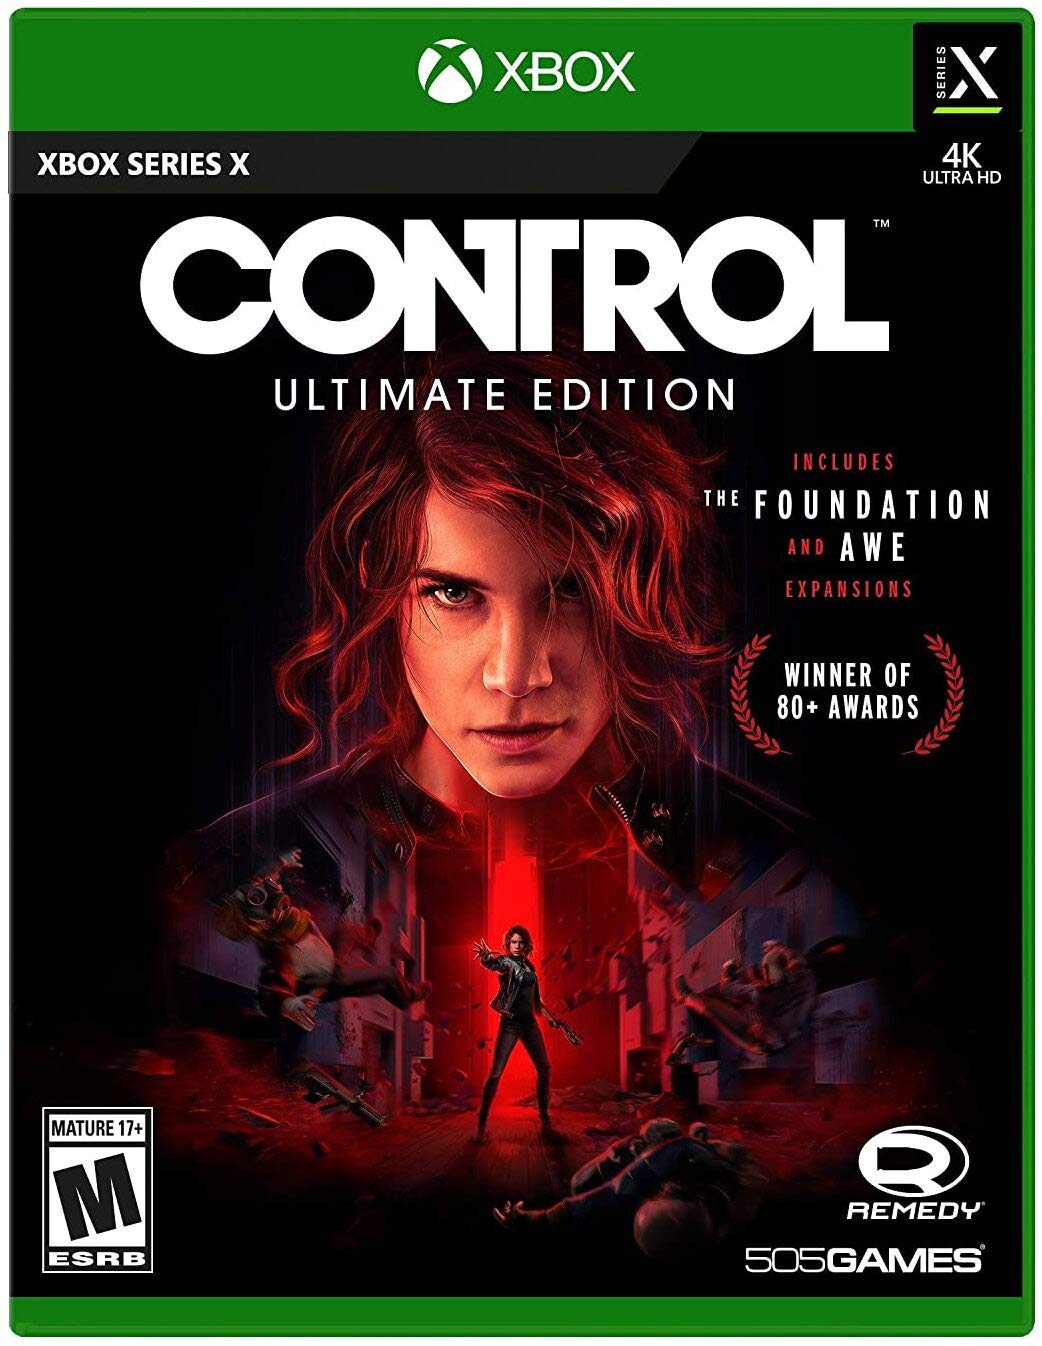 Control ultimate edition - xbox series x